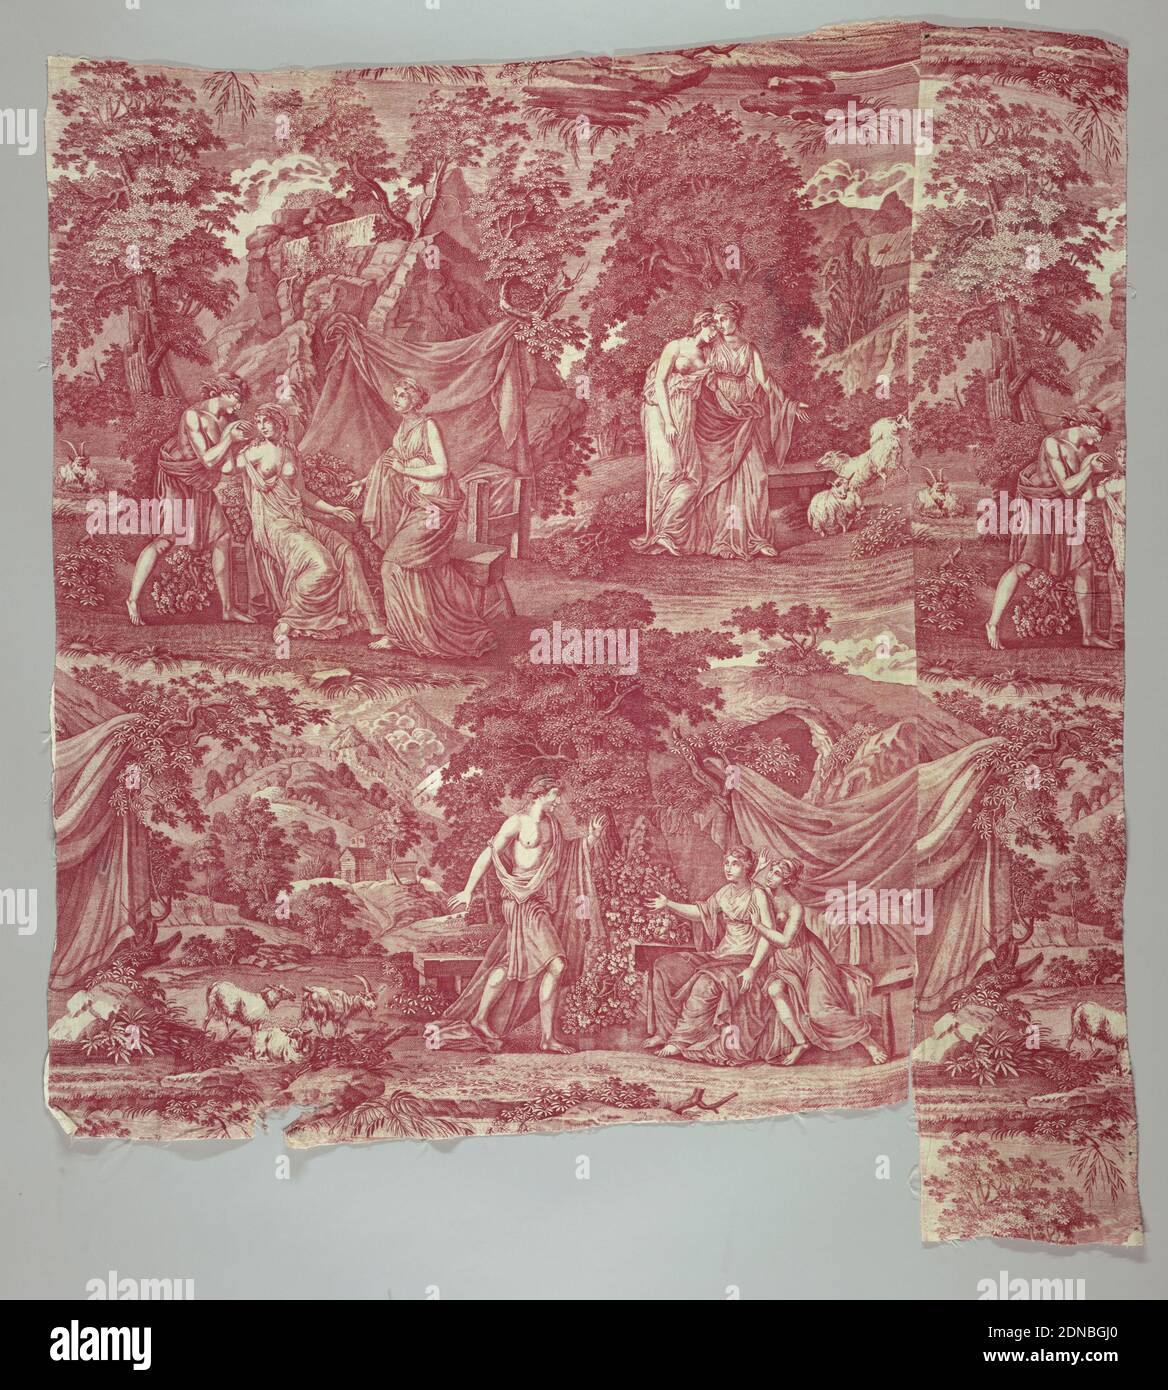 Textile, Medium: cotton Technique: printed by engraved plate on plain weave, Two women and a man all in classical dress in a pastoral setting. In red on white., France, ca. 1800, printed, dyed & painted textiles, Textile Stock Photo